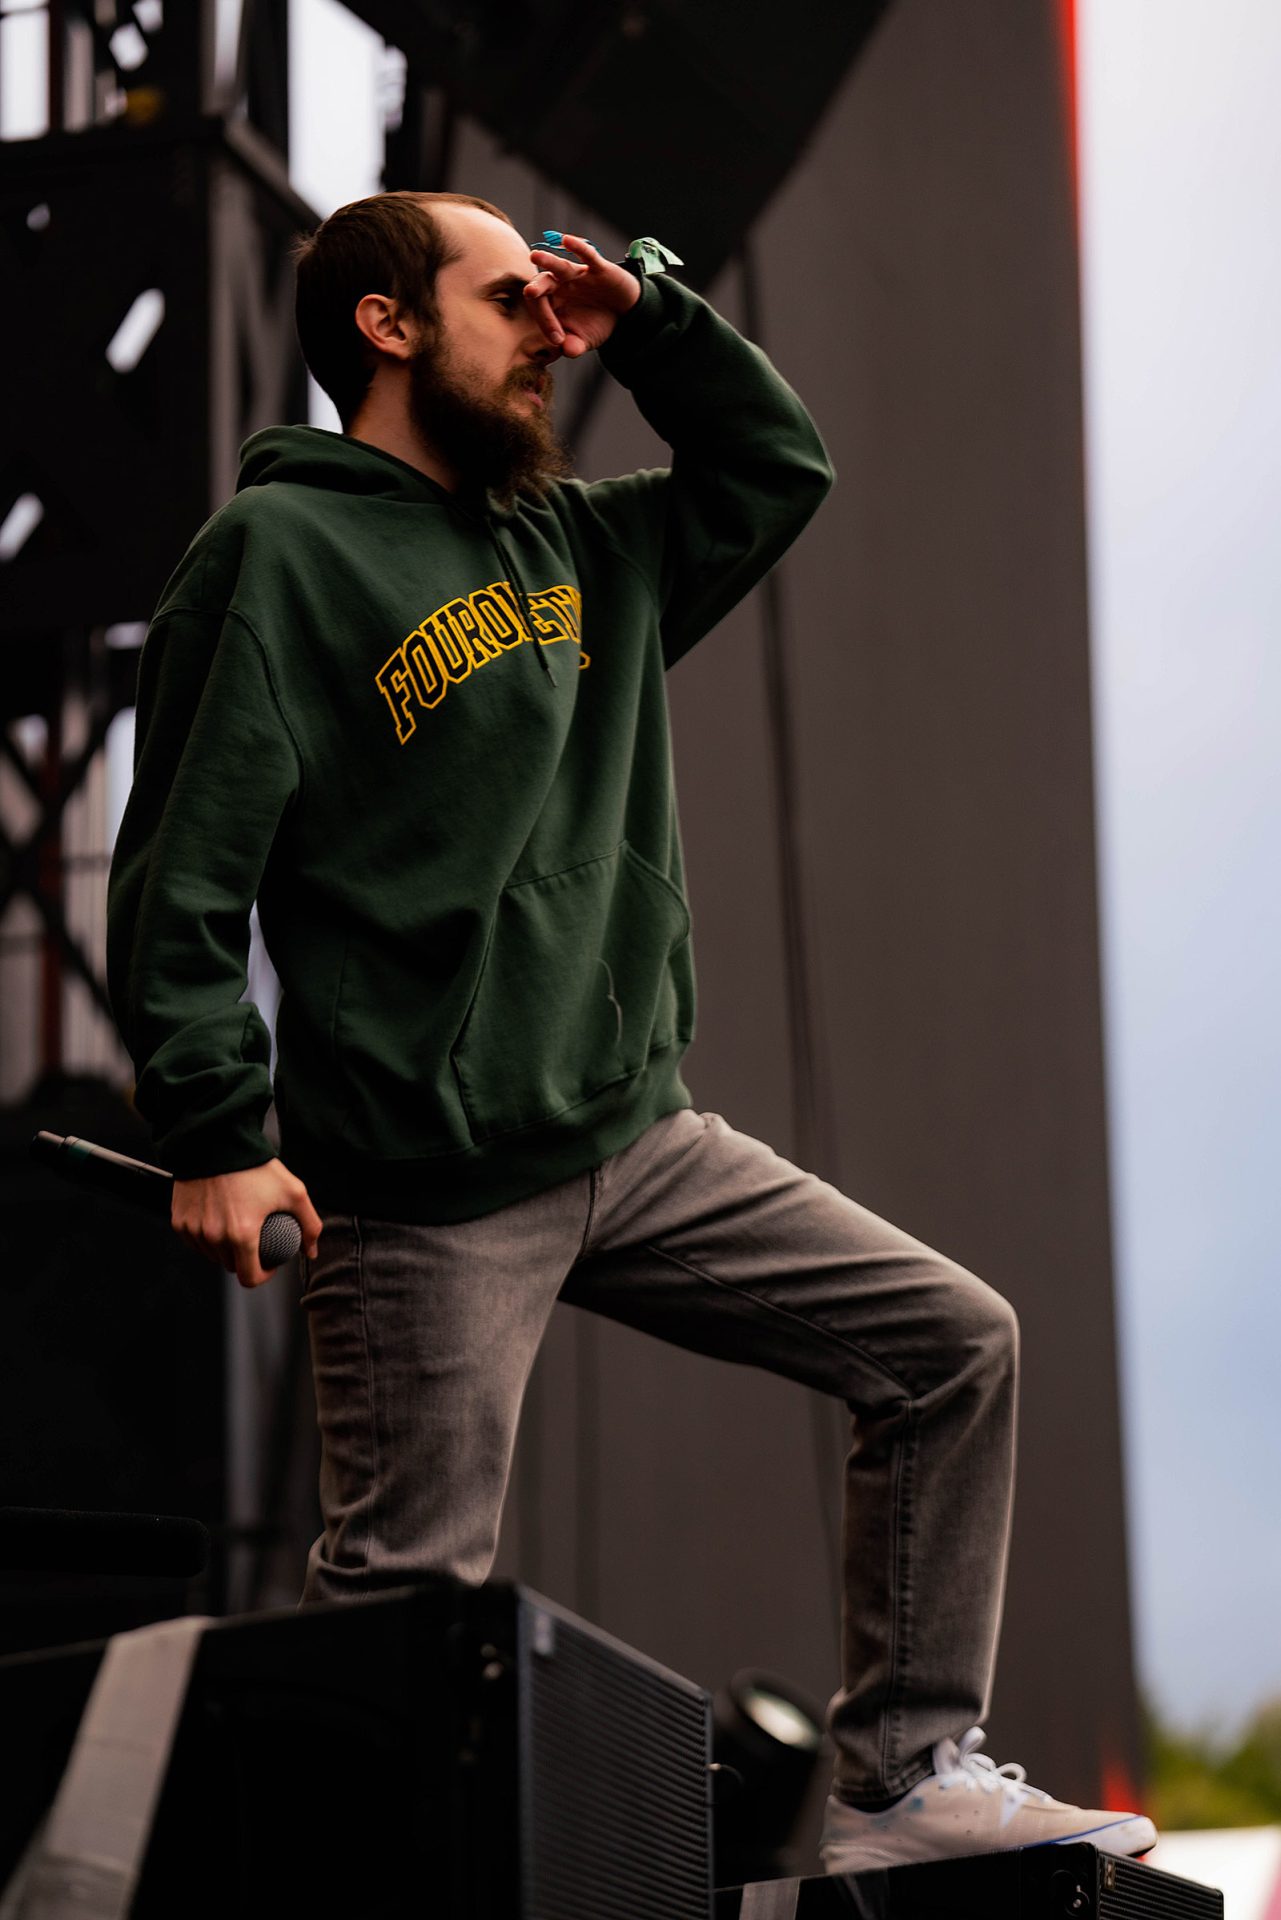 Pouya at Rolling Loud NYC 2021: Friday